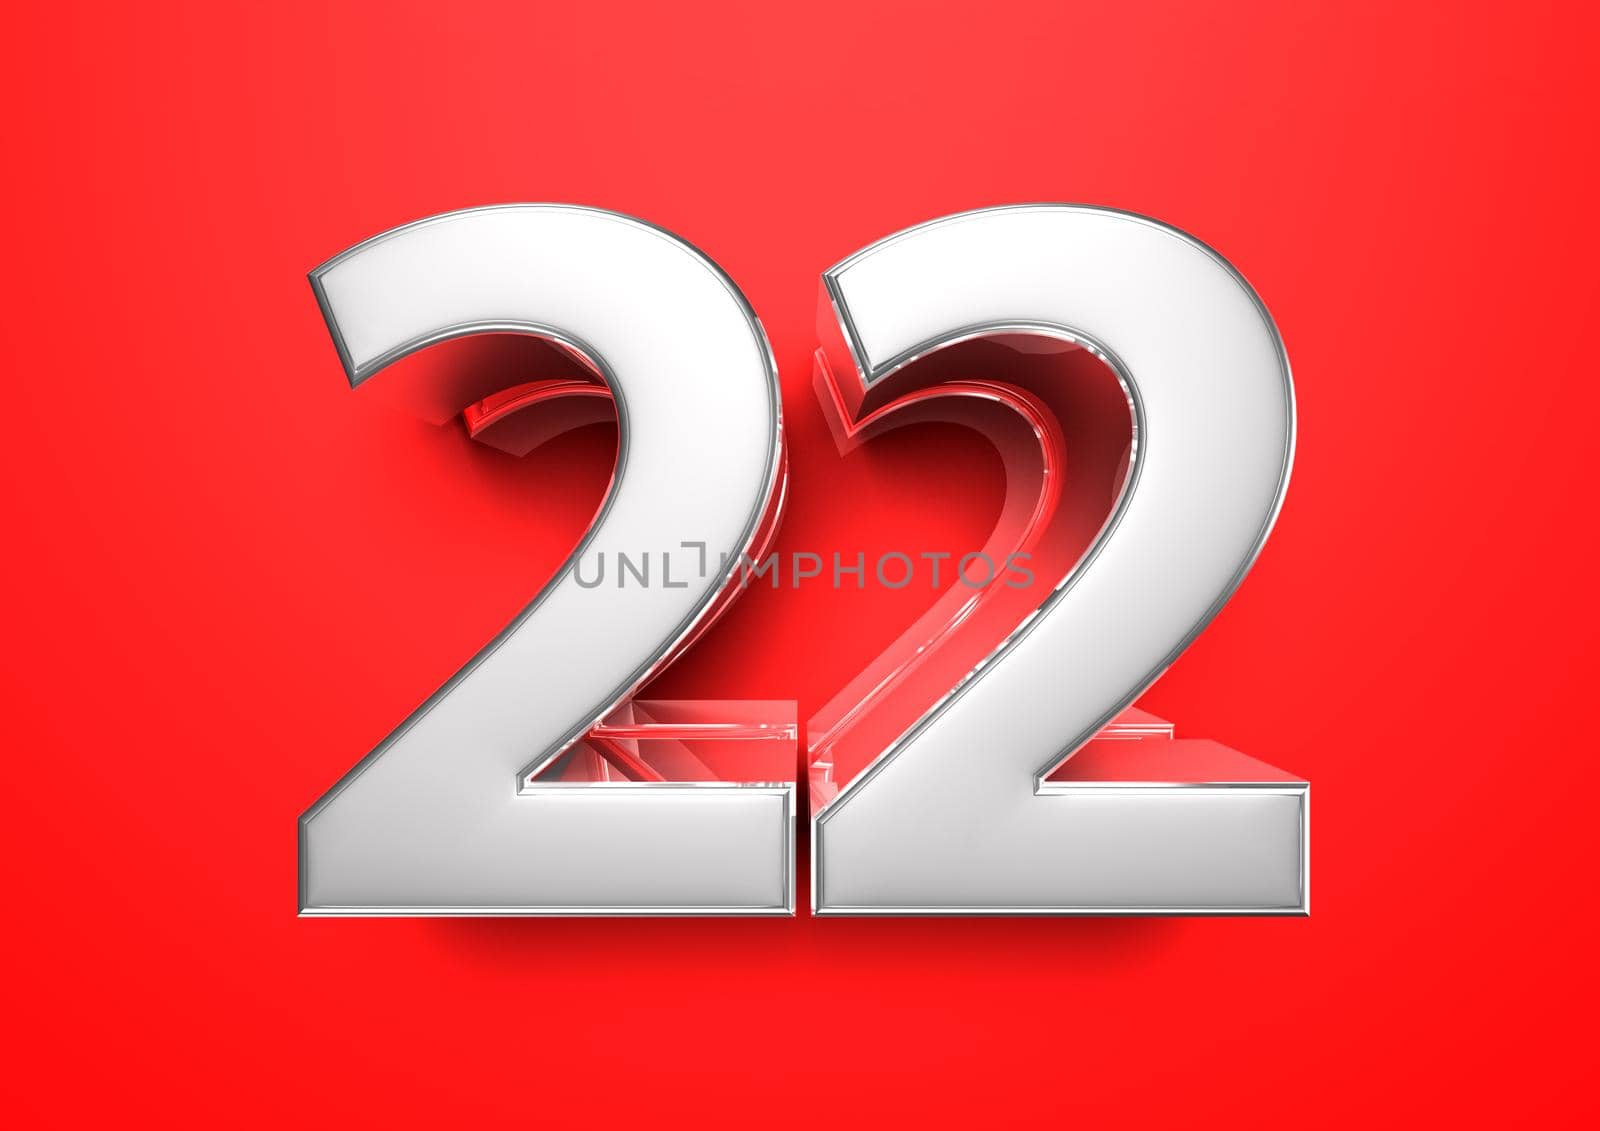 Price tag 22. Anniversary 22. Number 22 3D illustration on a red background. by thitimontoyai